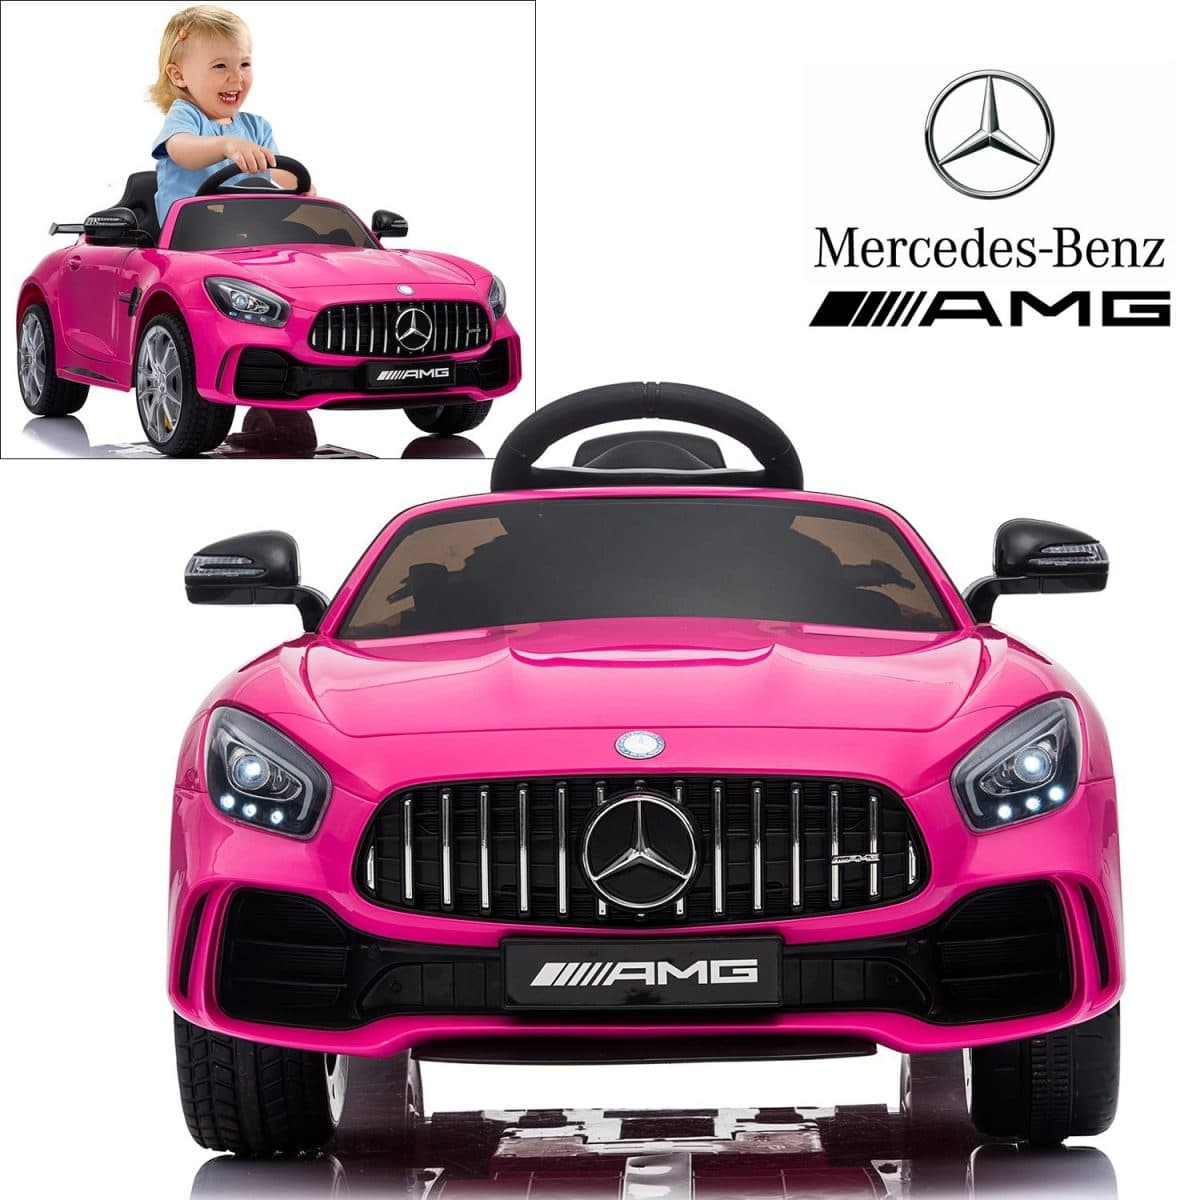 remote control cars for young child